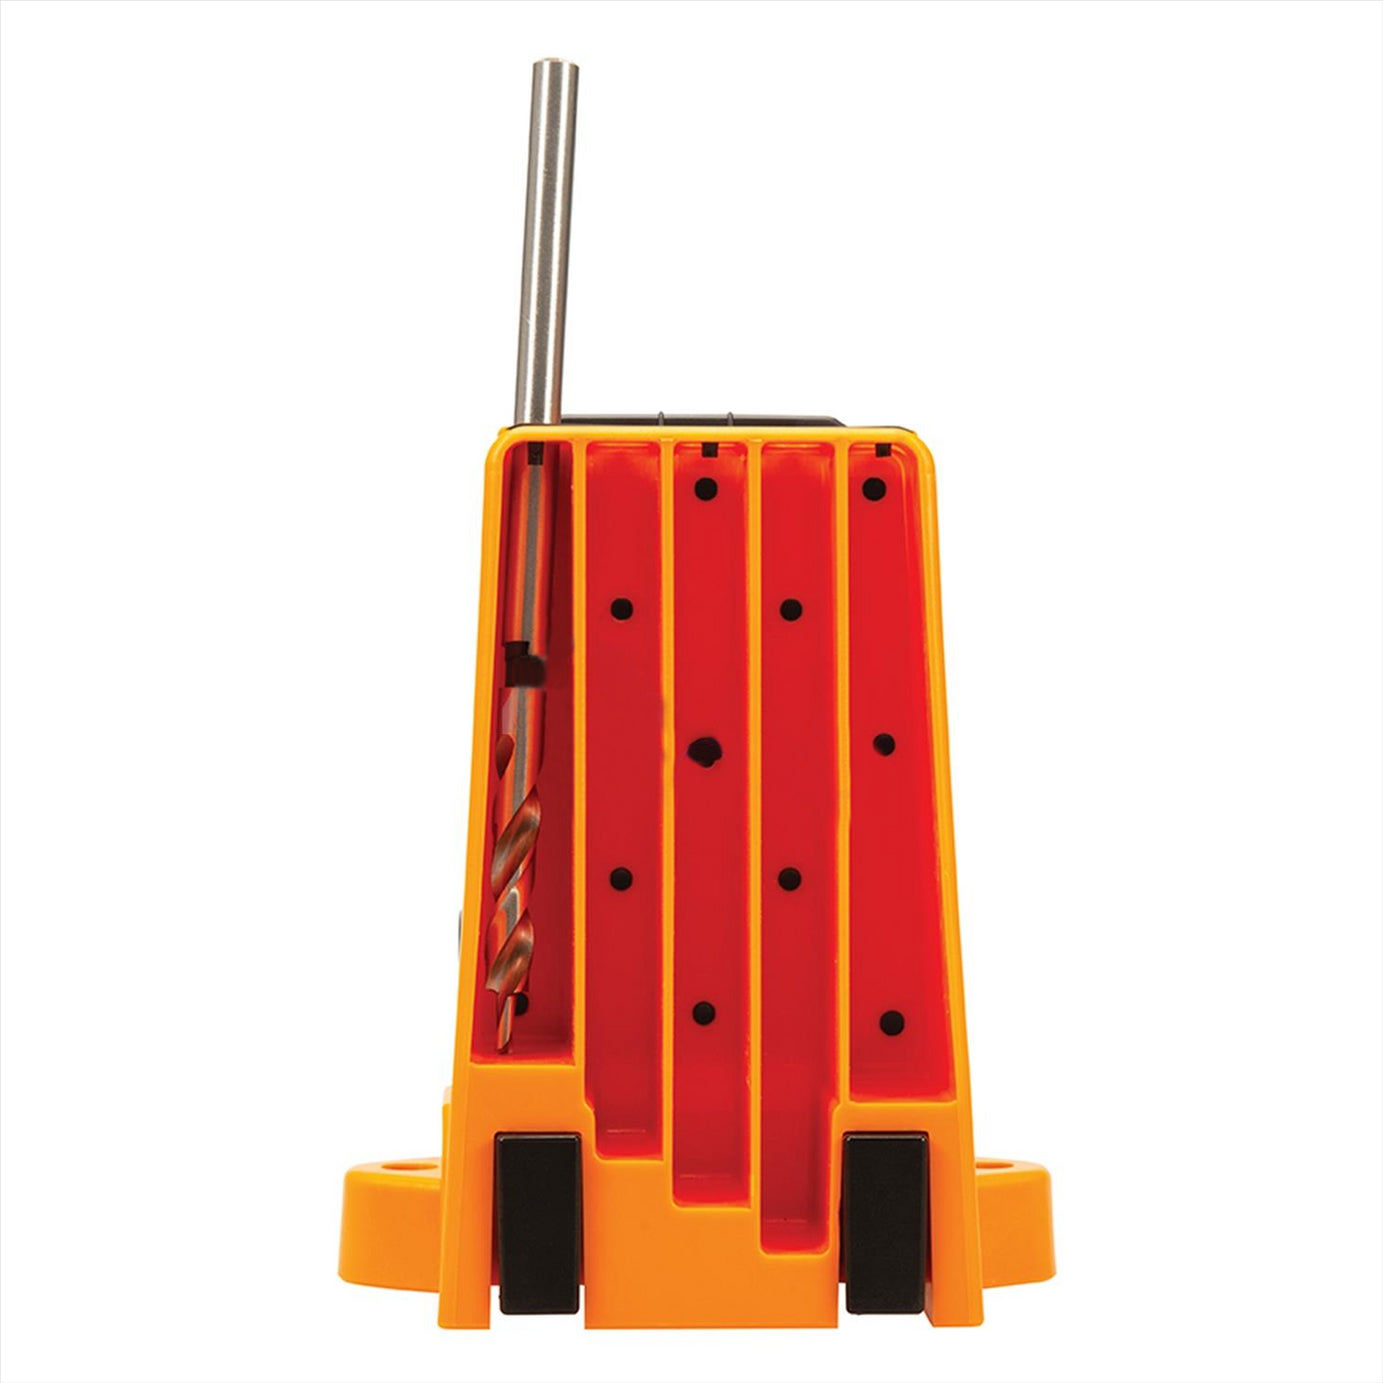 T6 Pocket-Hole Jig T6PHJ Can be used + 12 - 42mm (1/2 - 1-1/2") thickness wood